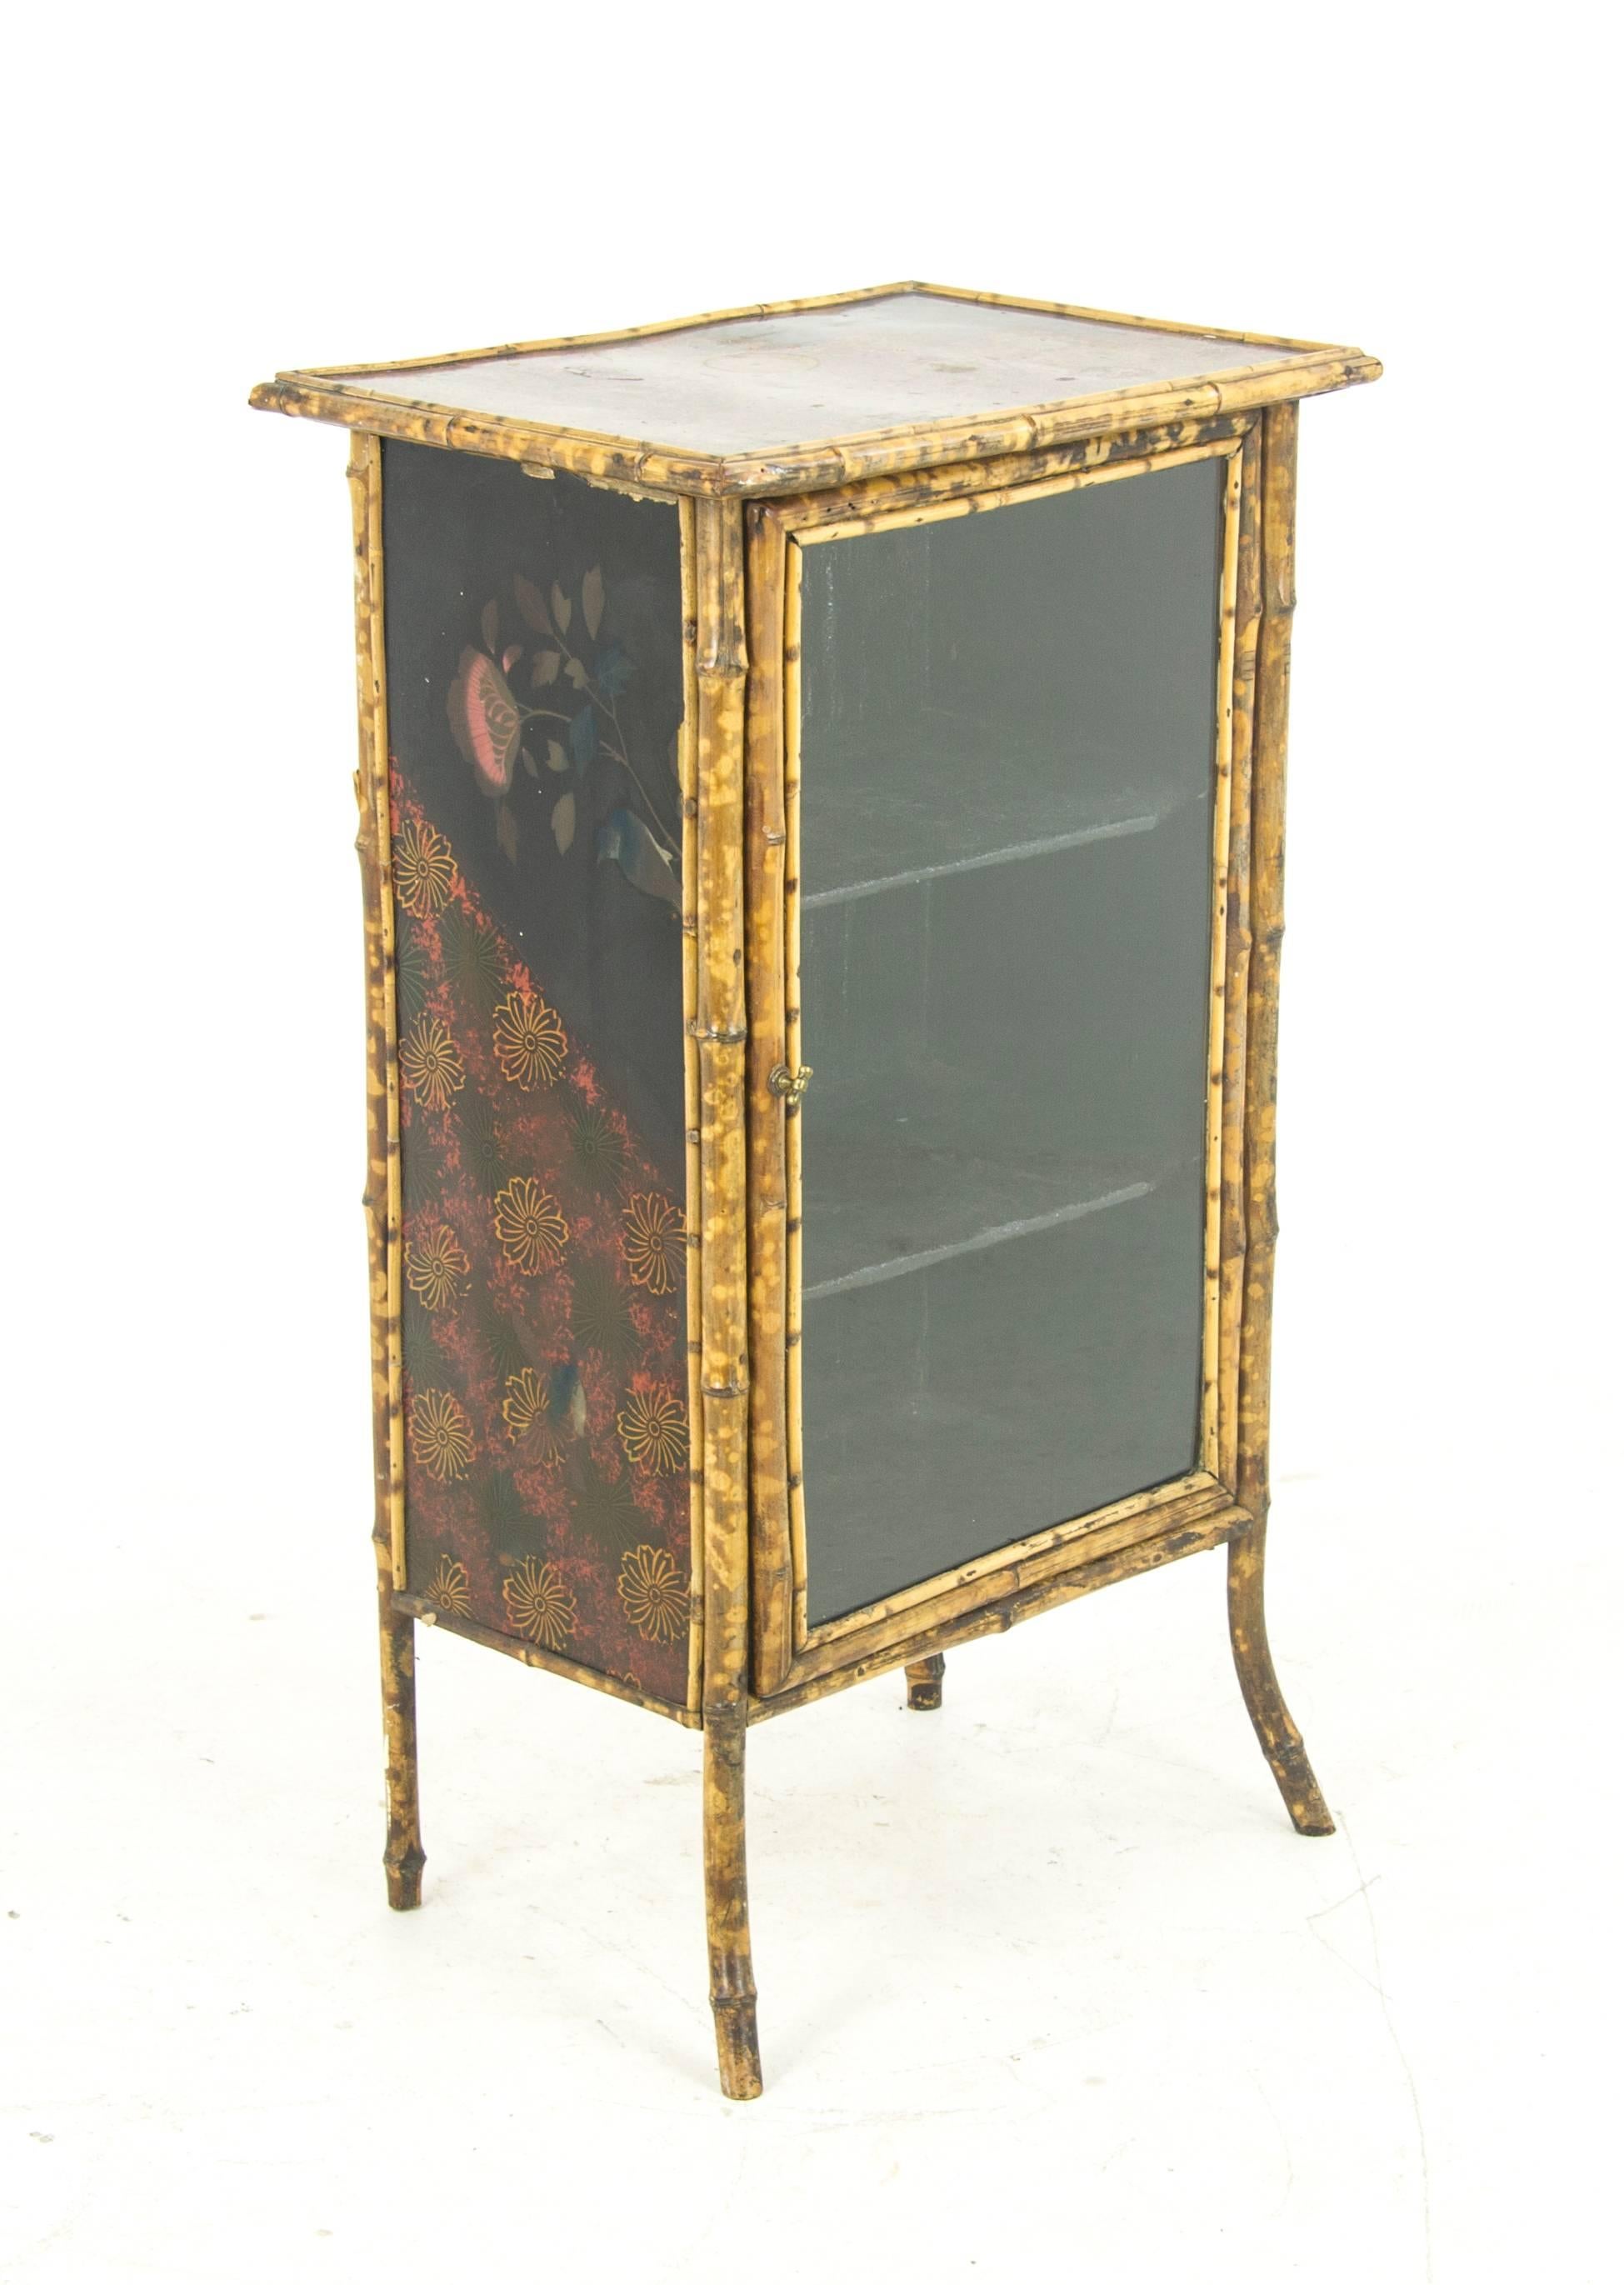 Bamboo furniture, antique display cabinet, bamboo bookcase, Scotland, 1880

Victorian bamboo display cabinet
Scotland, 1880
All original finish
Hand-painted panel on top
Single glass door below
Fitted with two fixed shelves
Ending on splayed